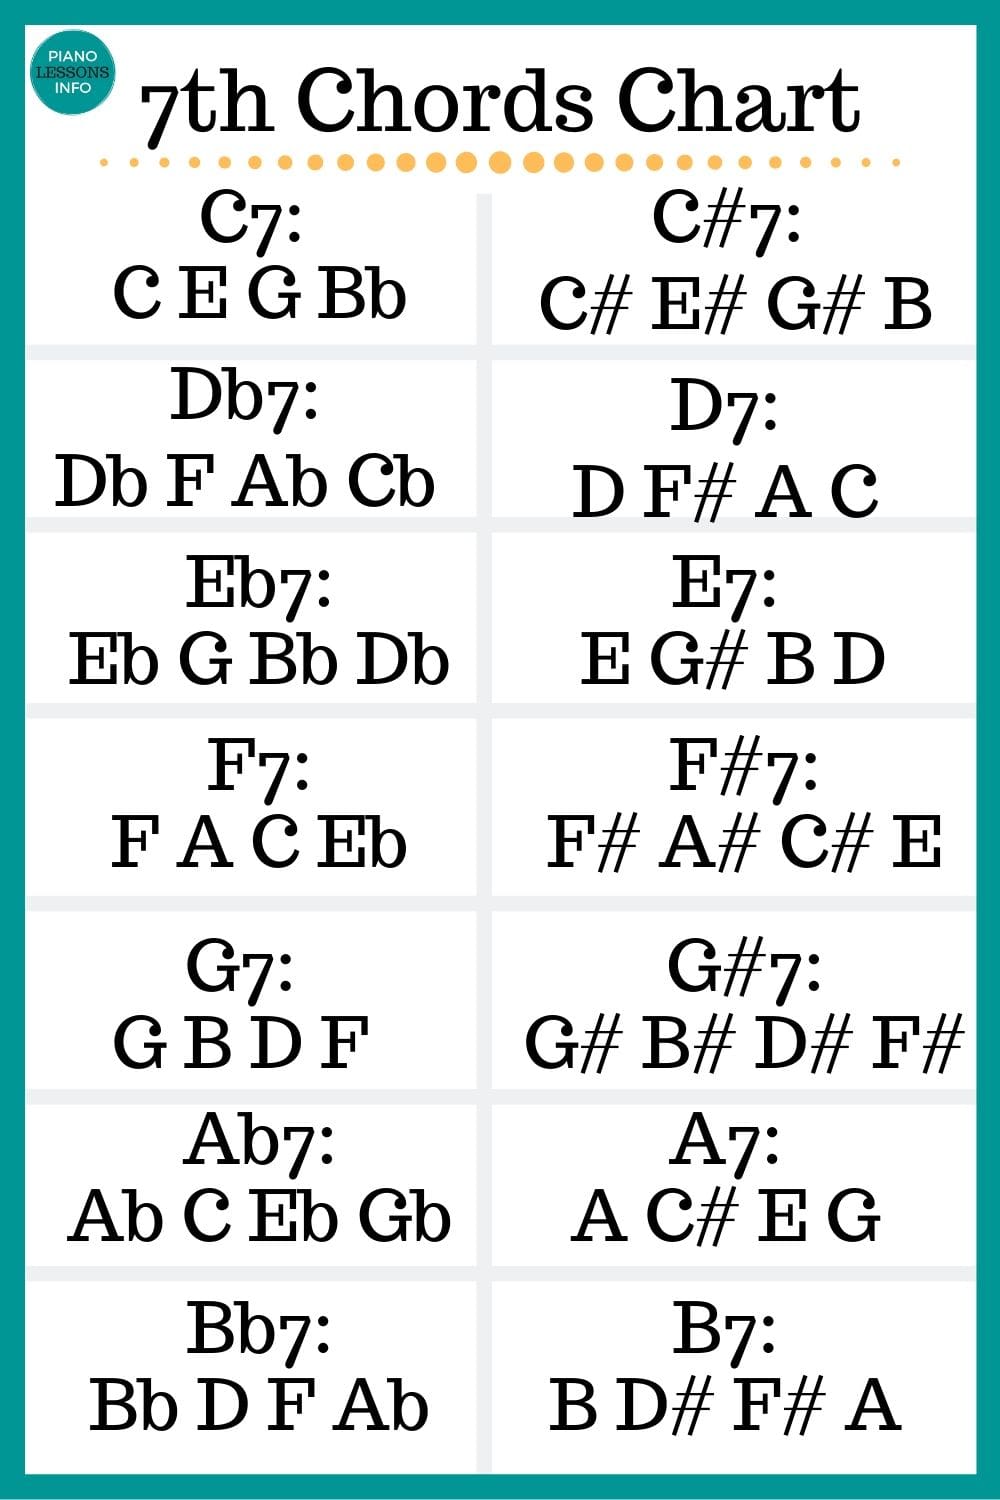 Learn all about 7th chords on piano and get the chart of the 7th piano chords. Plus theory!